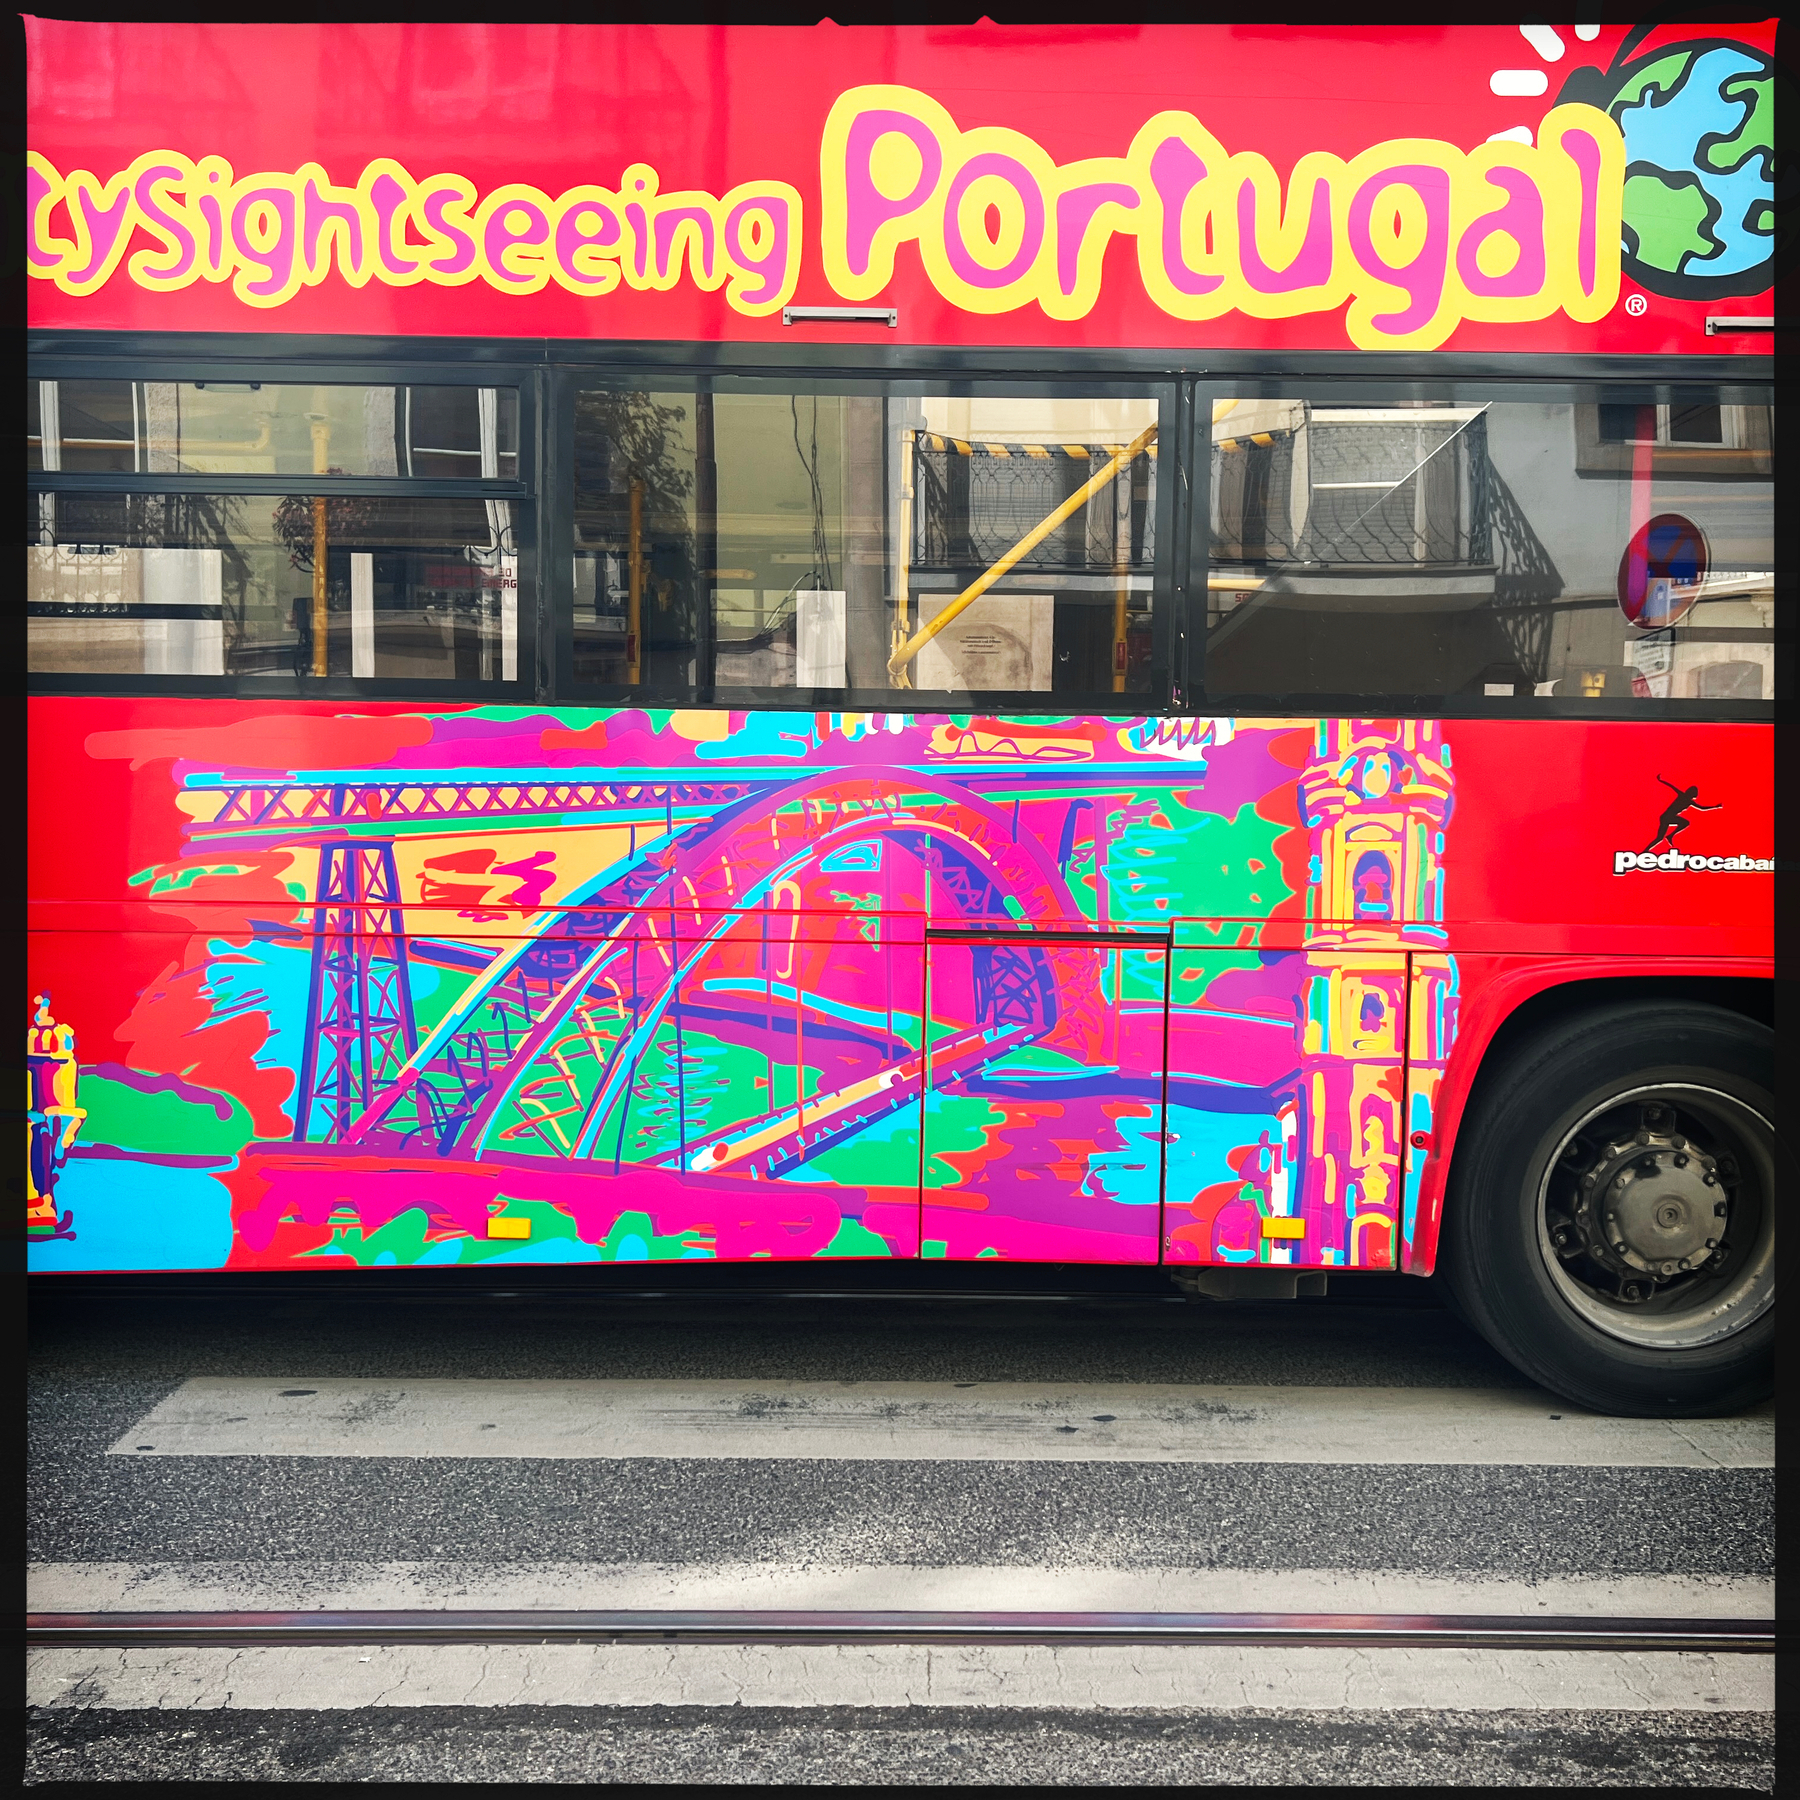 A hop on hop off bus, with “sightseeing Portugal” written on it. 